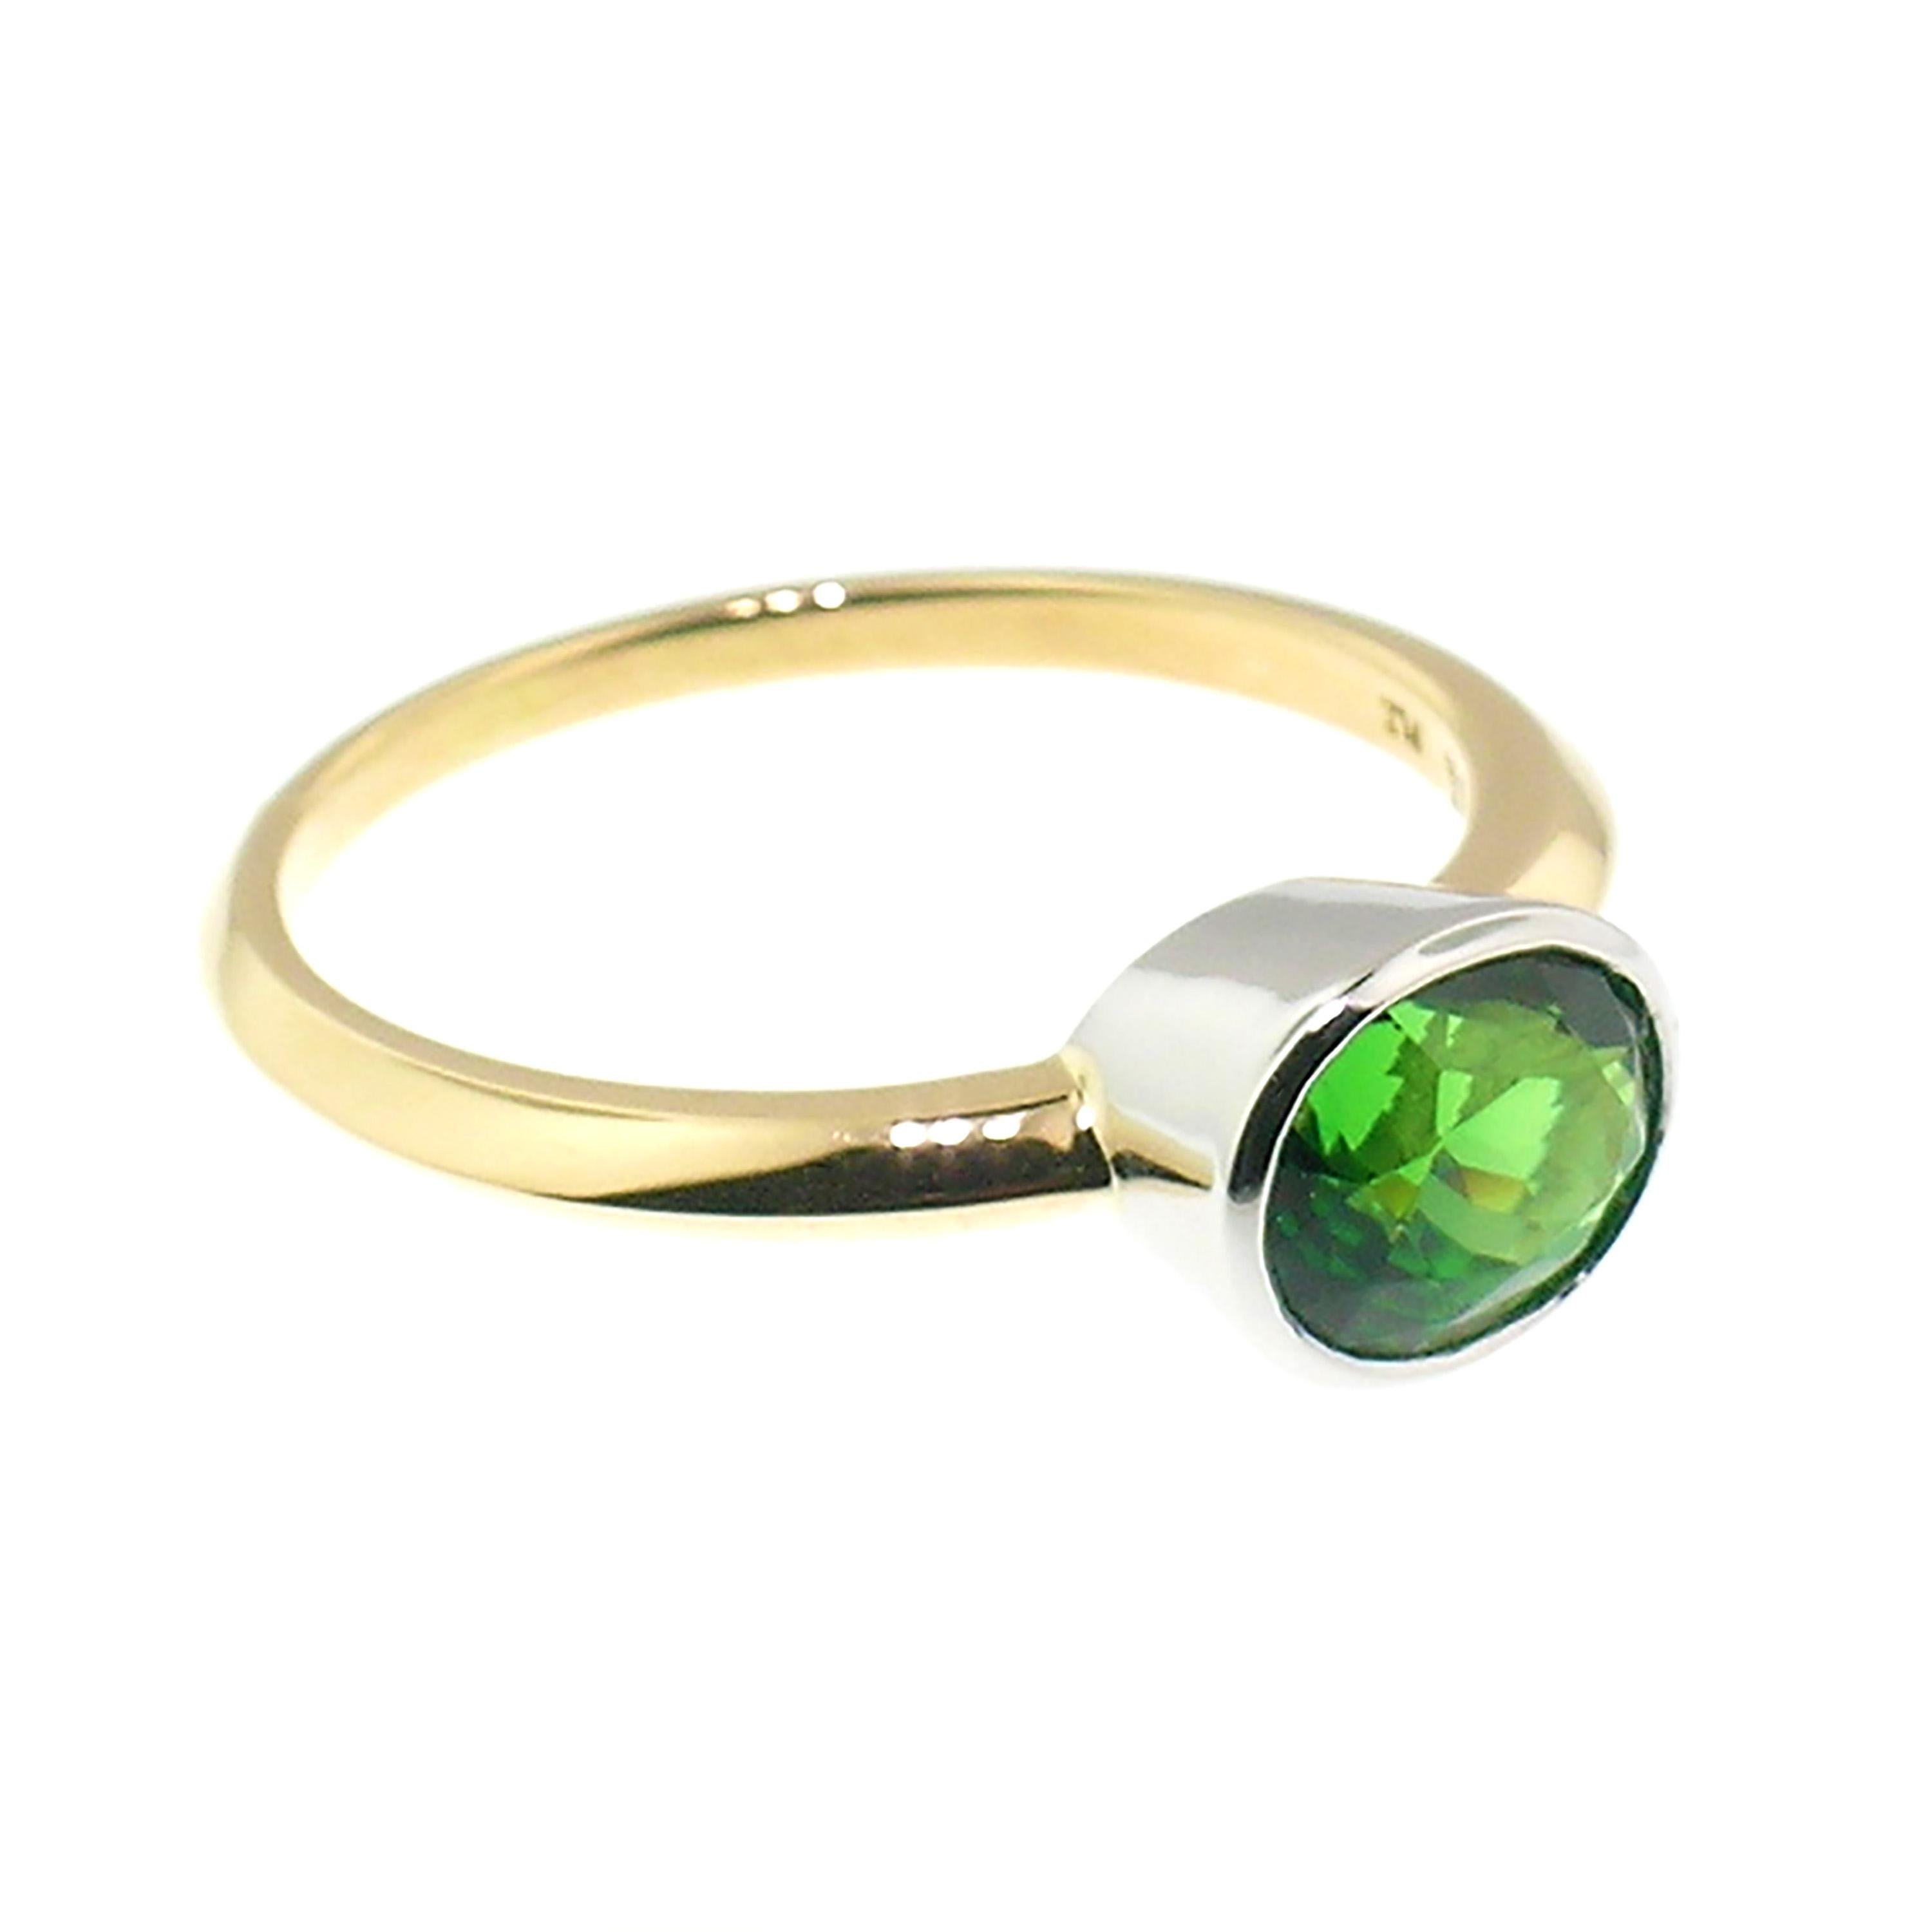 Cynthia Scott 1.45ct Chrome Tourmaline, 18kt and Platinum Paloma Ring In New Condition For Sale In Logan, UT